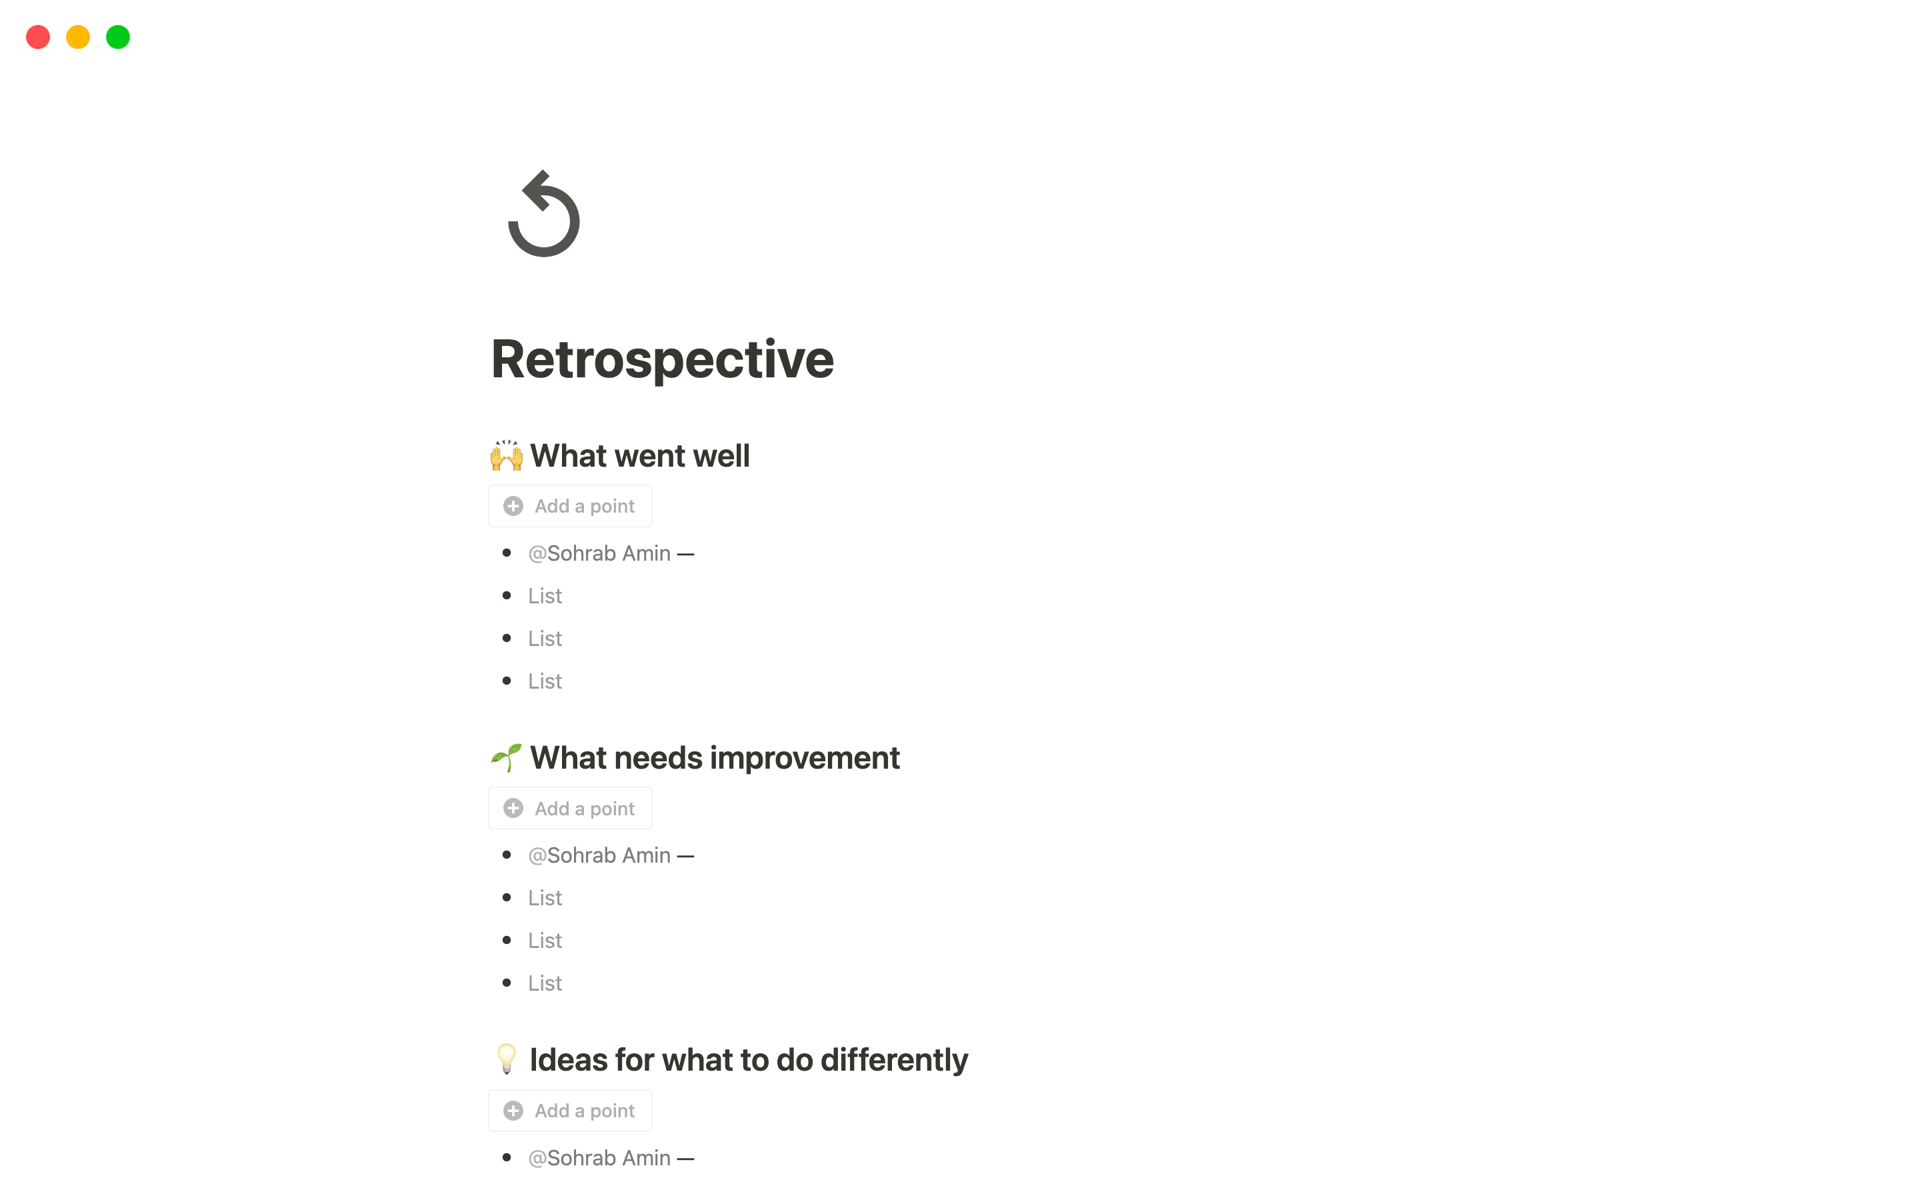 Screenshot of Best 10 Retrospective Templates for Mechanical Engineers collection by Notion